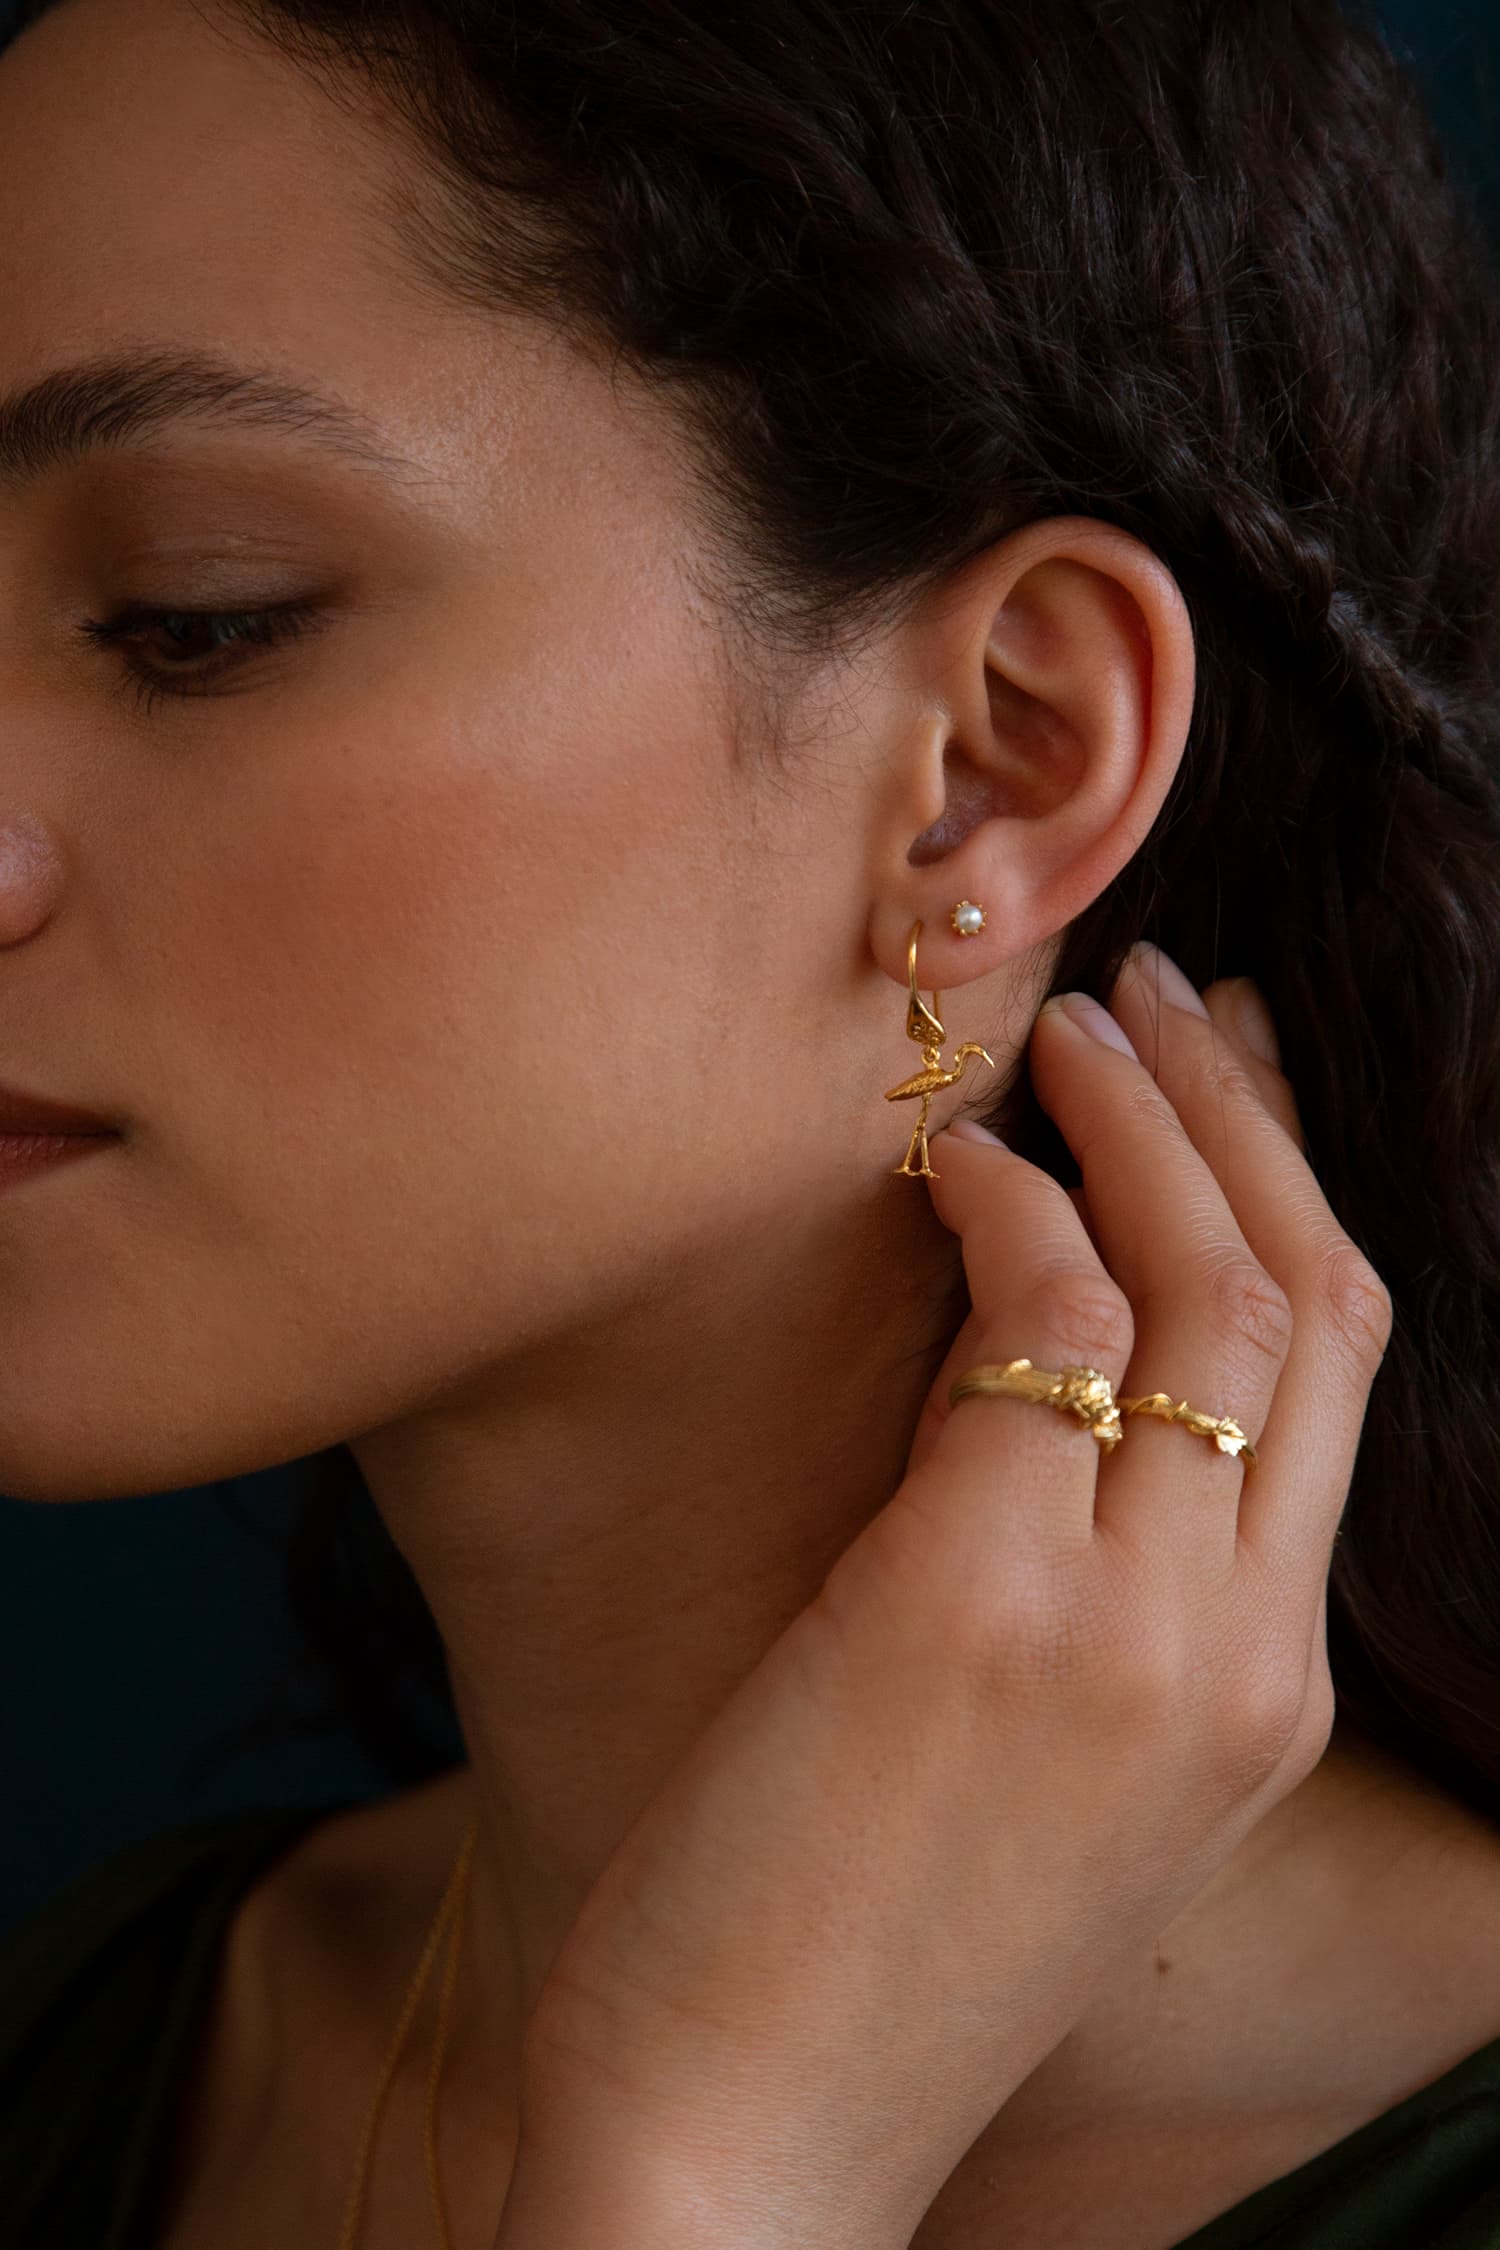 Model wears Fables Heron Ornate Hook Earrings in gold plate paired with pearl stud and column rings